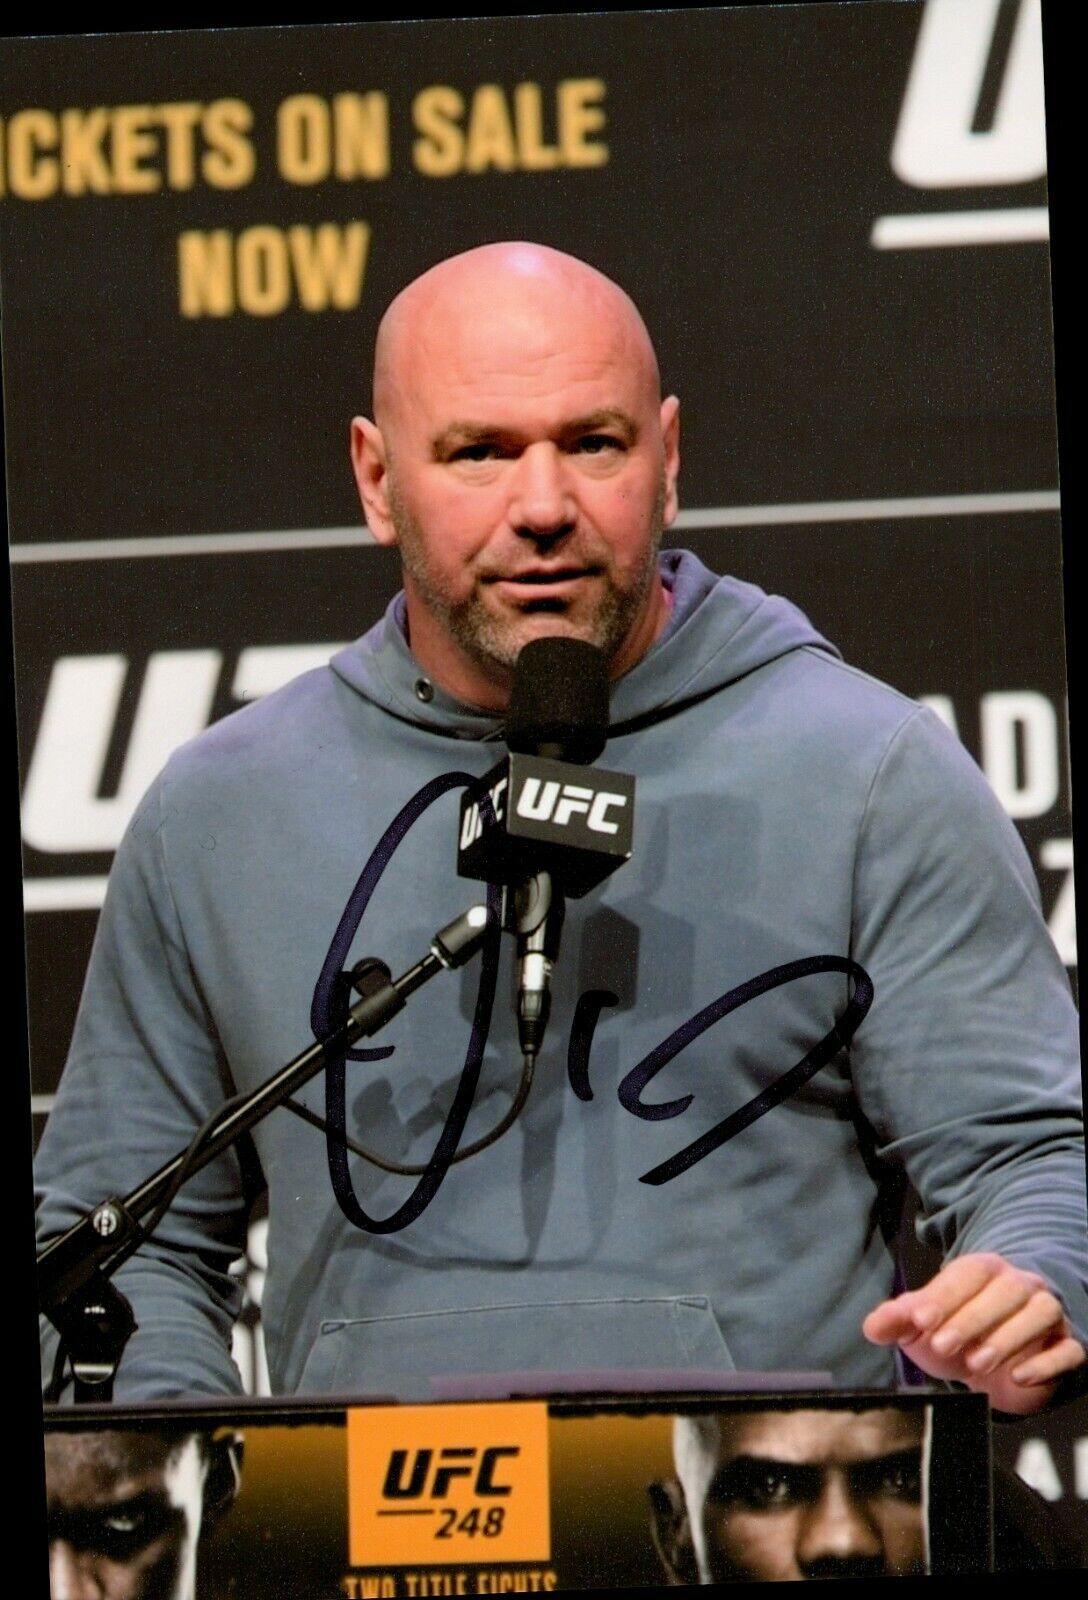 Dana White Signed 6x4 Photo Poster painting UFC President Looking for a Fight Autograph + COA